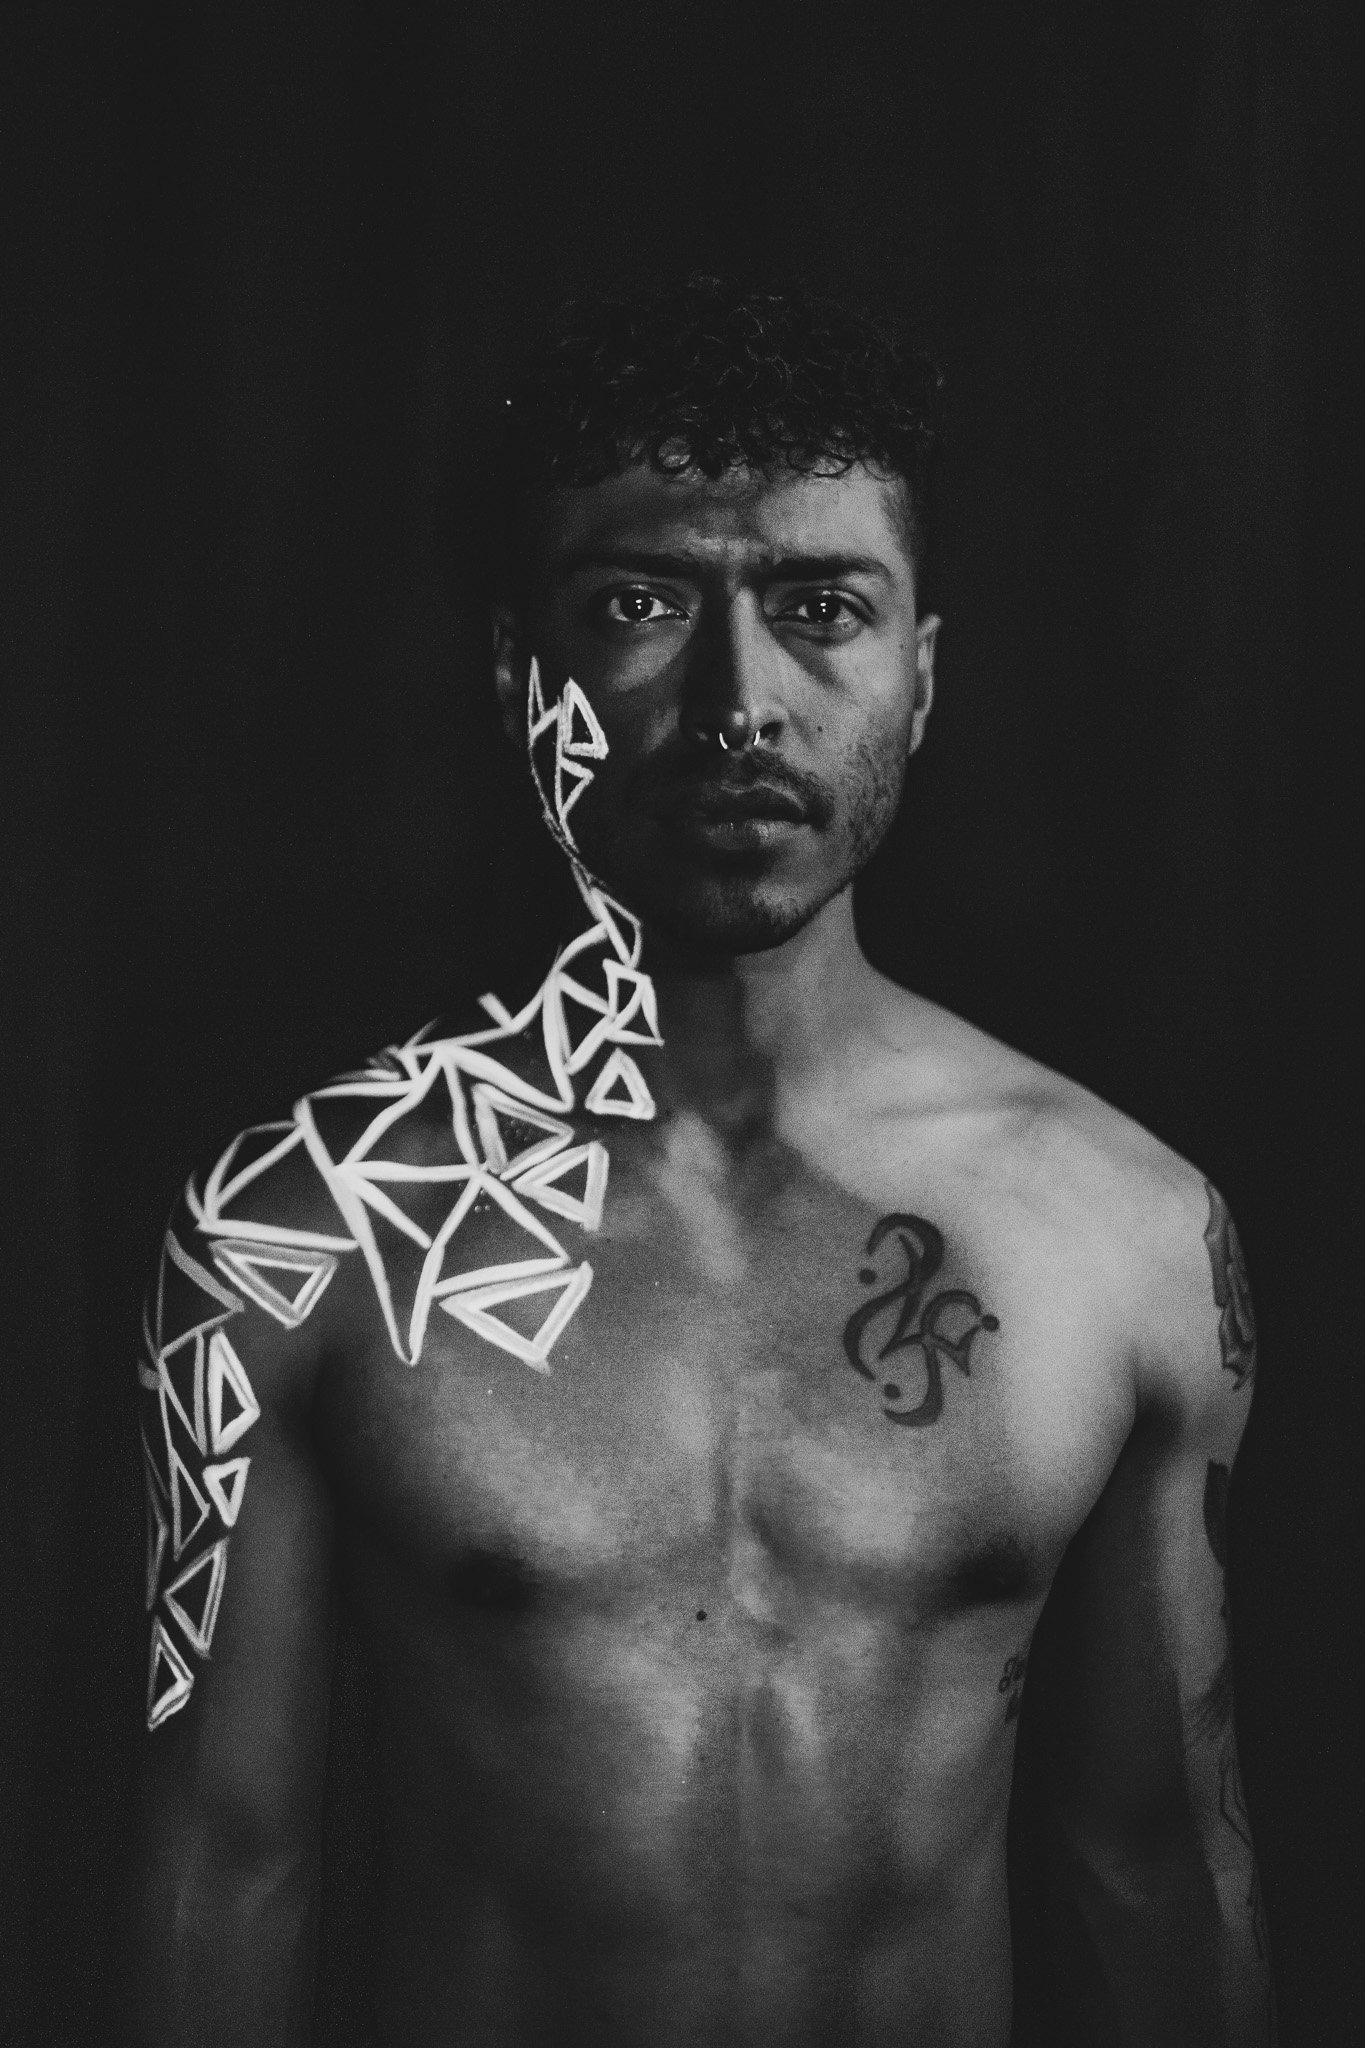 Man poses with geometric neon body paint on their face for alternative neon body painting creative photoshoot by phoenix body artist, La Luna Henna and photographer Jennifer Lind Schutsky.